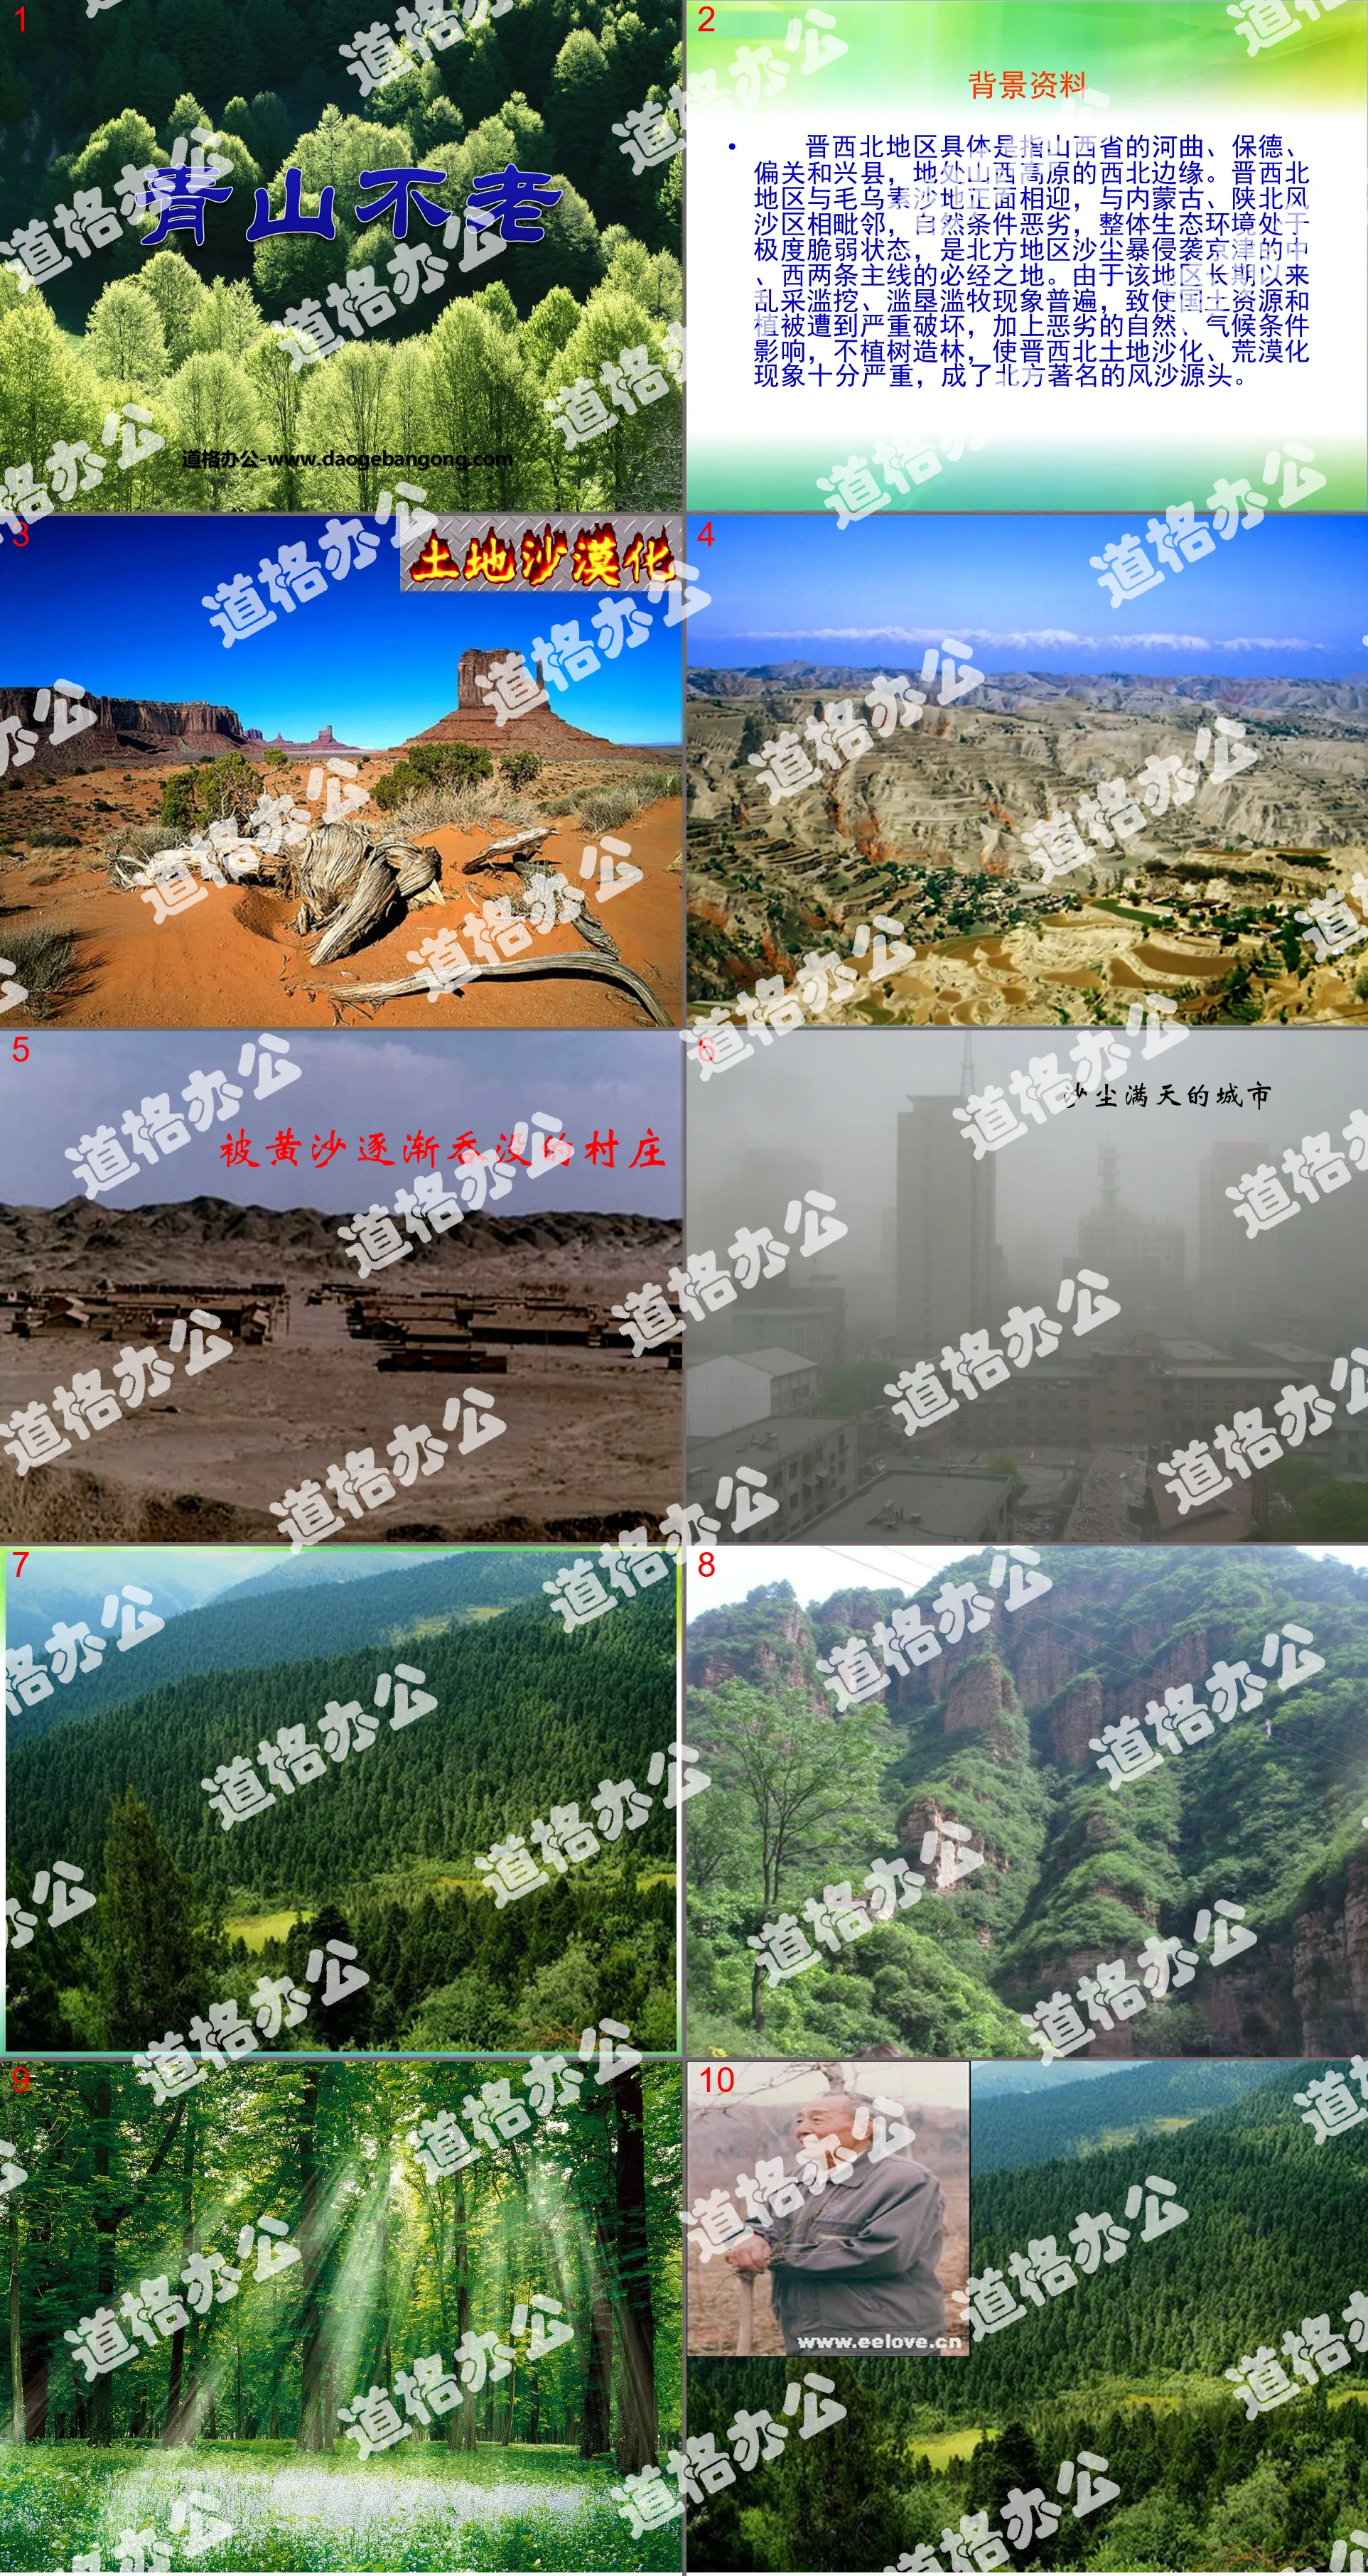 "Green Mountains Are Everlasting" PPT courseware download 5